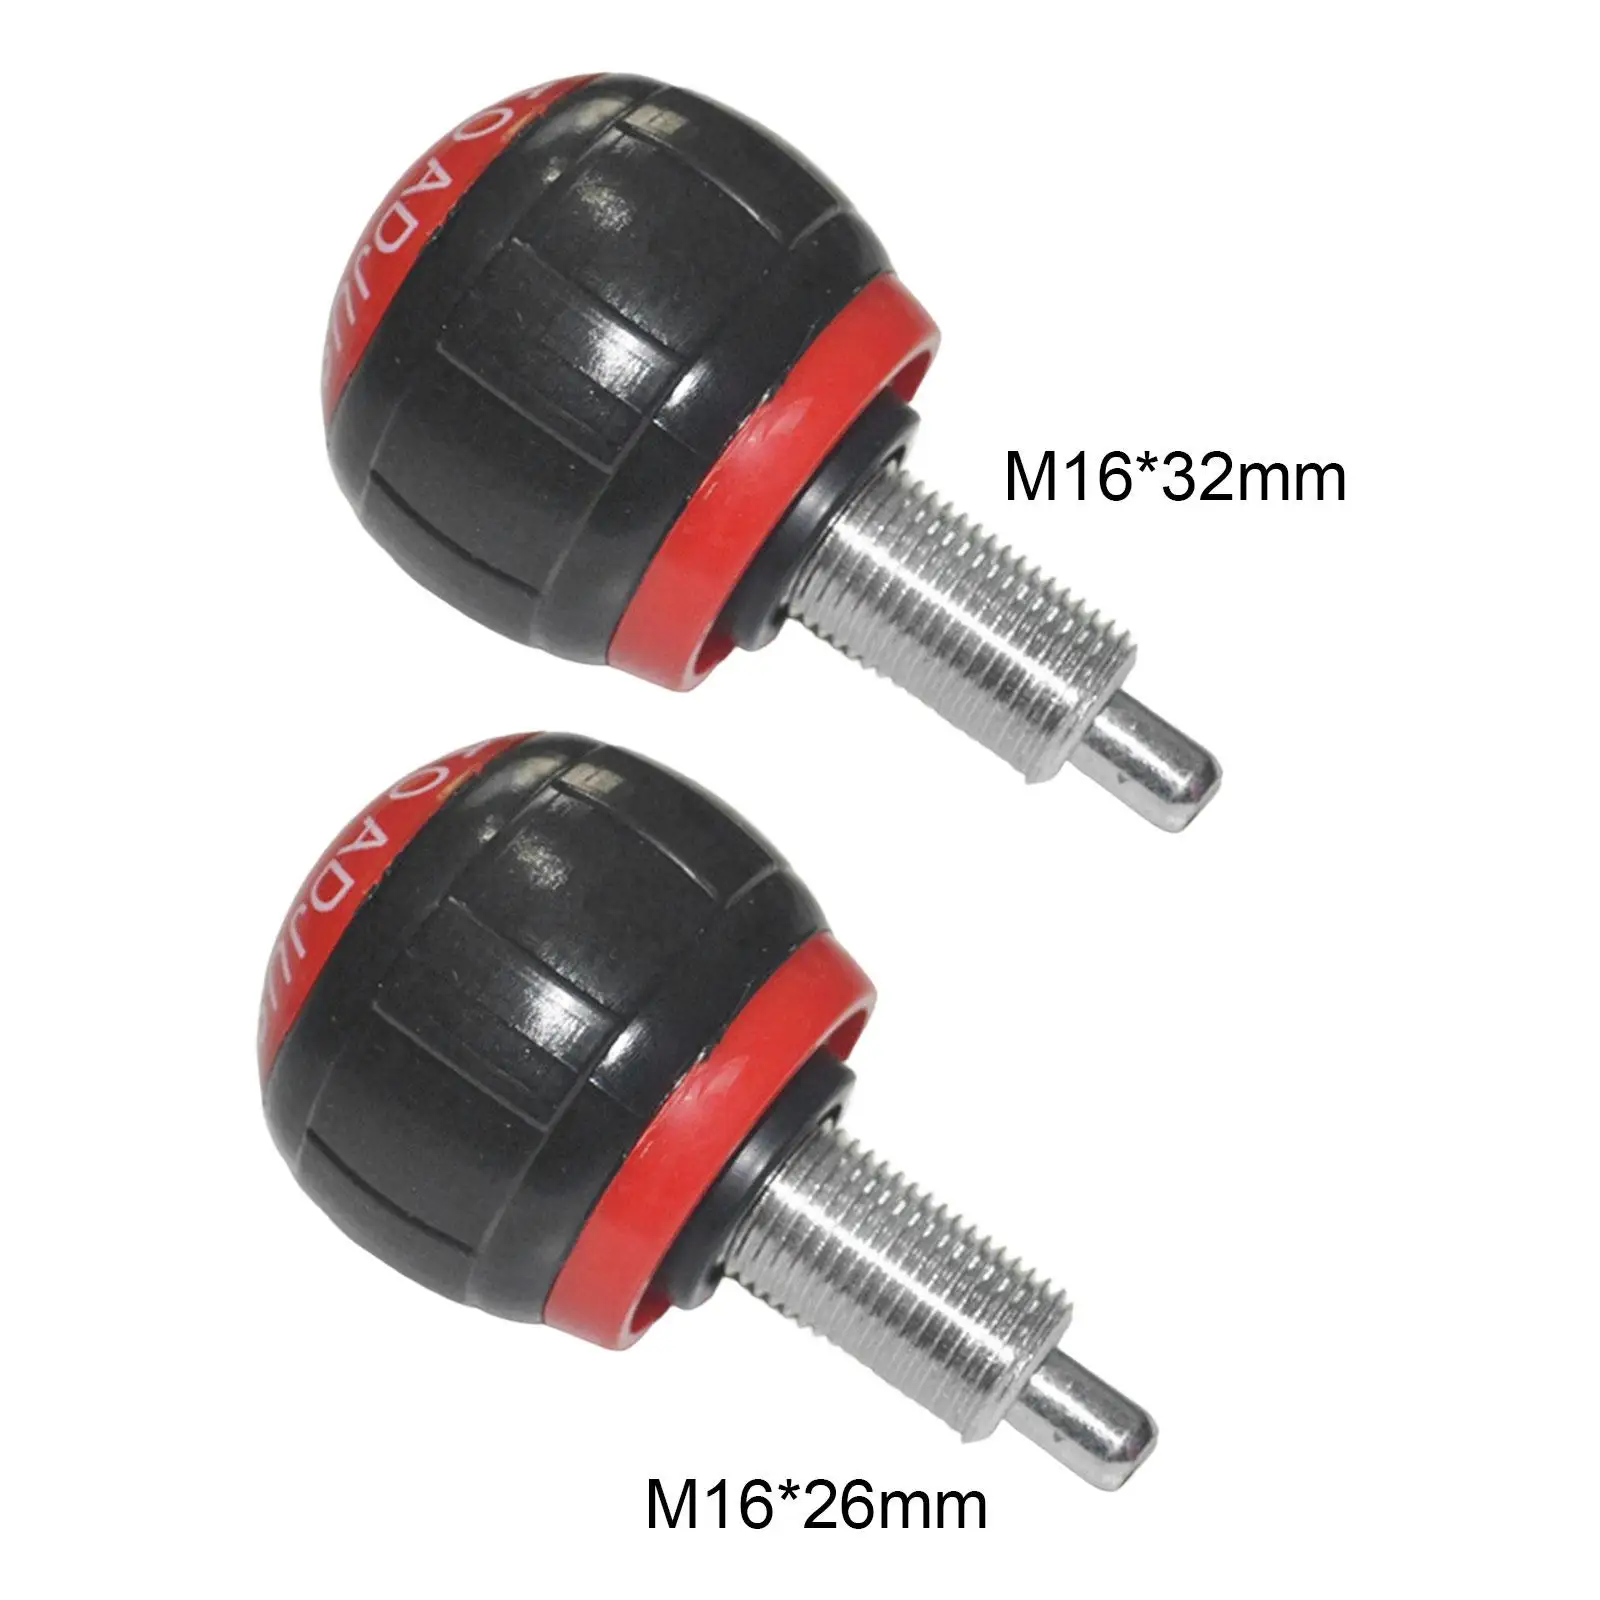 Fitness Bike Pull Pin M16 Thread Spring Knob for Indoor Home Workout Exercise Bike